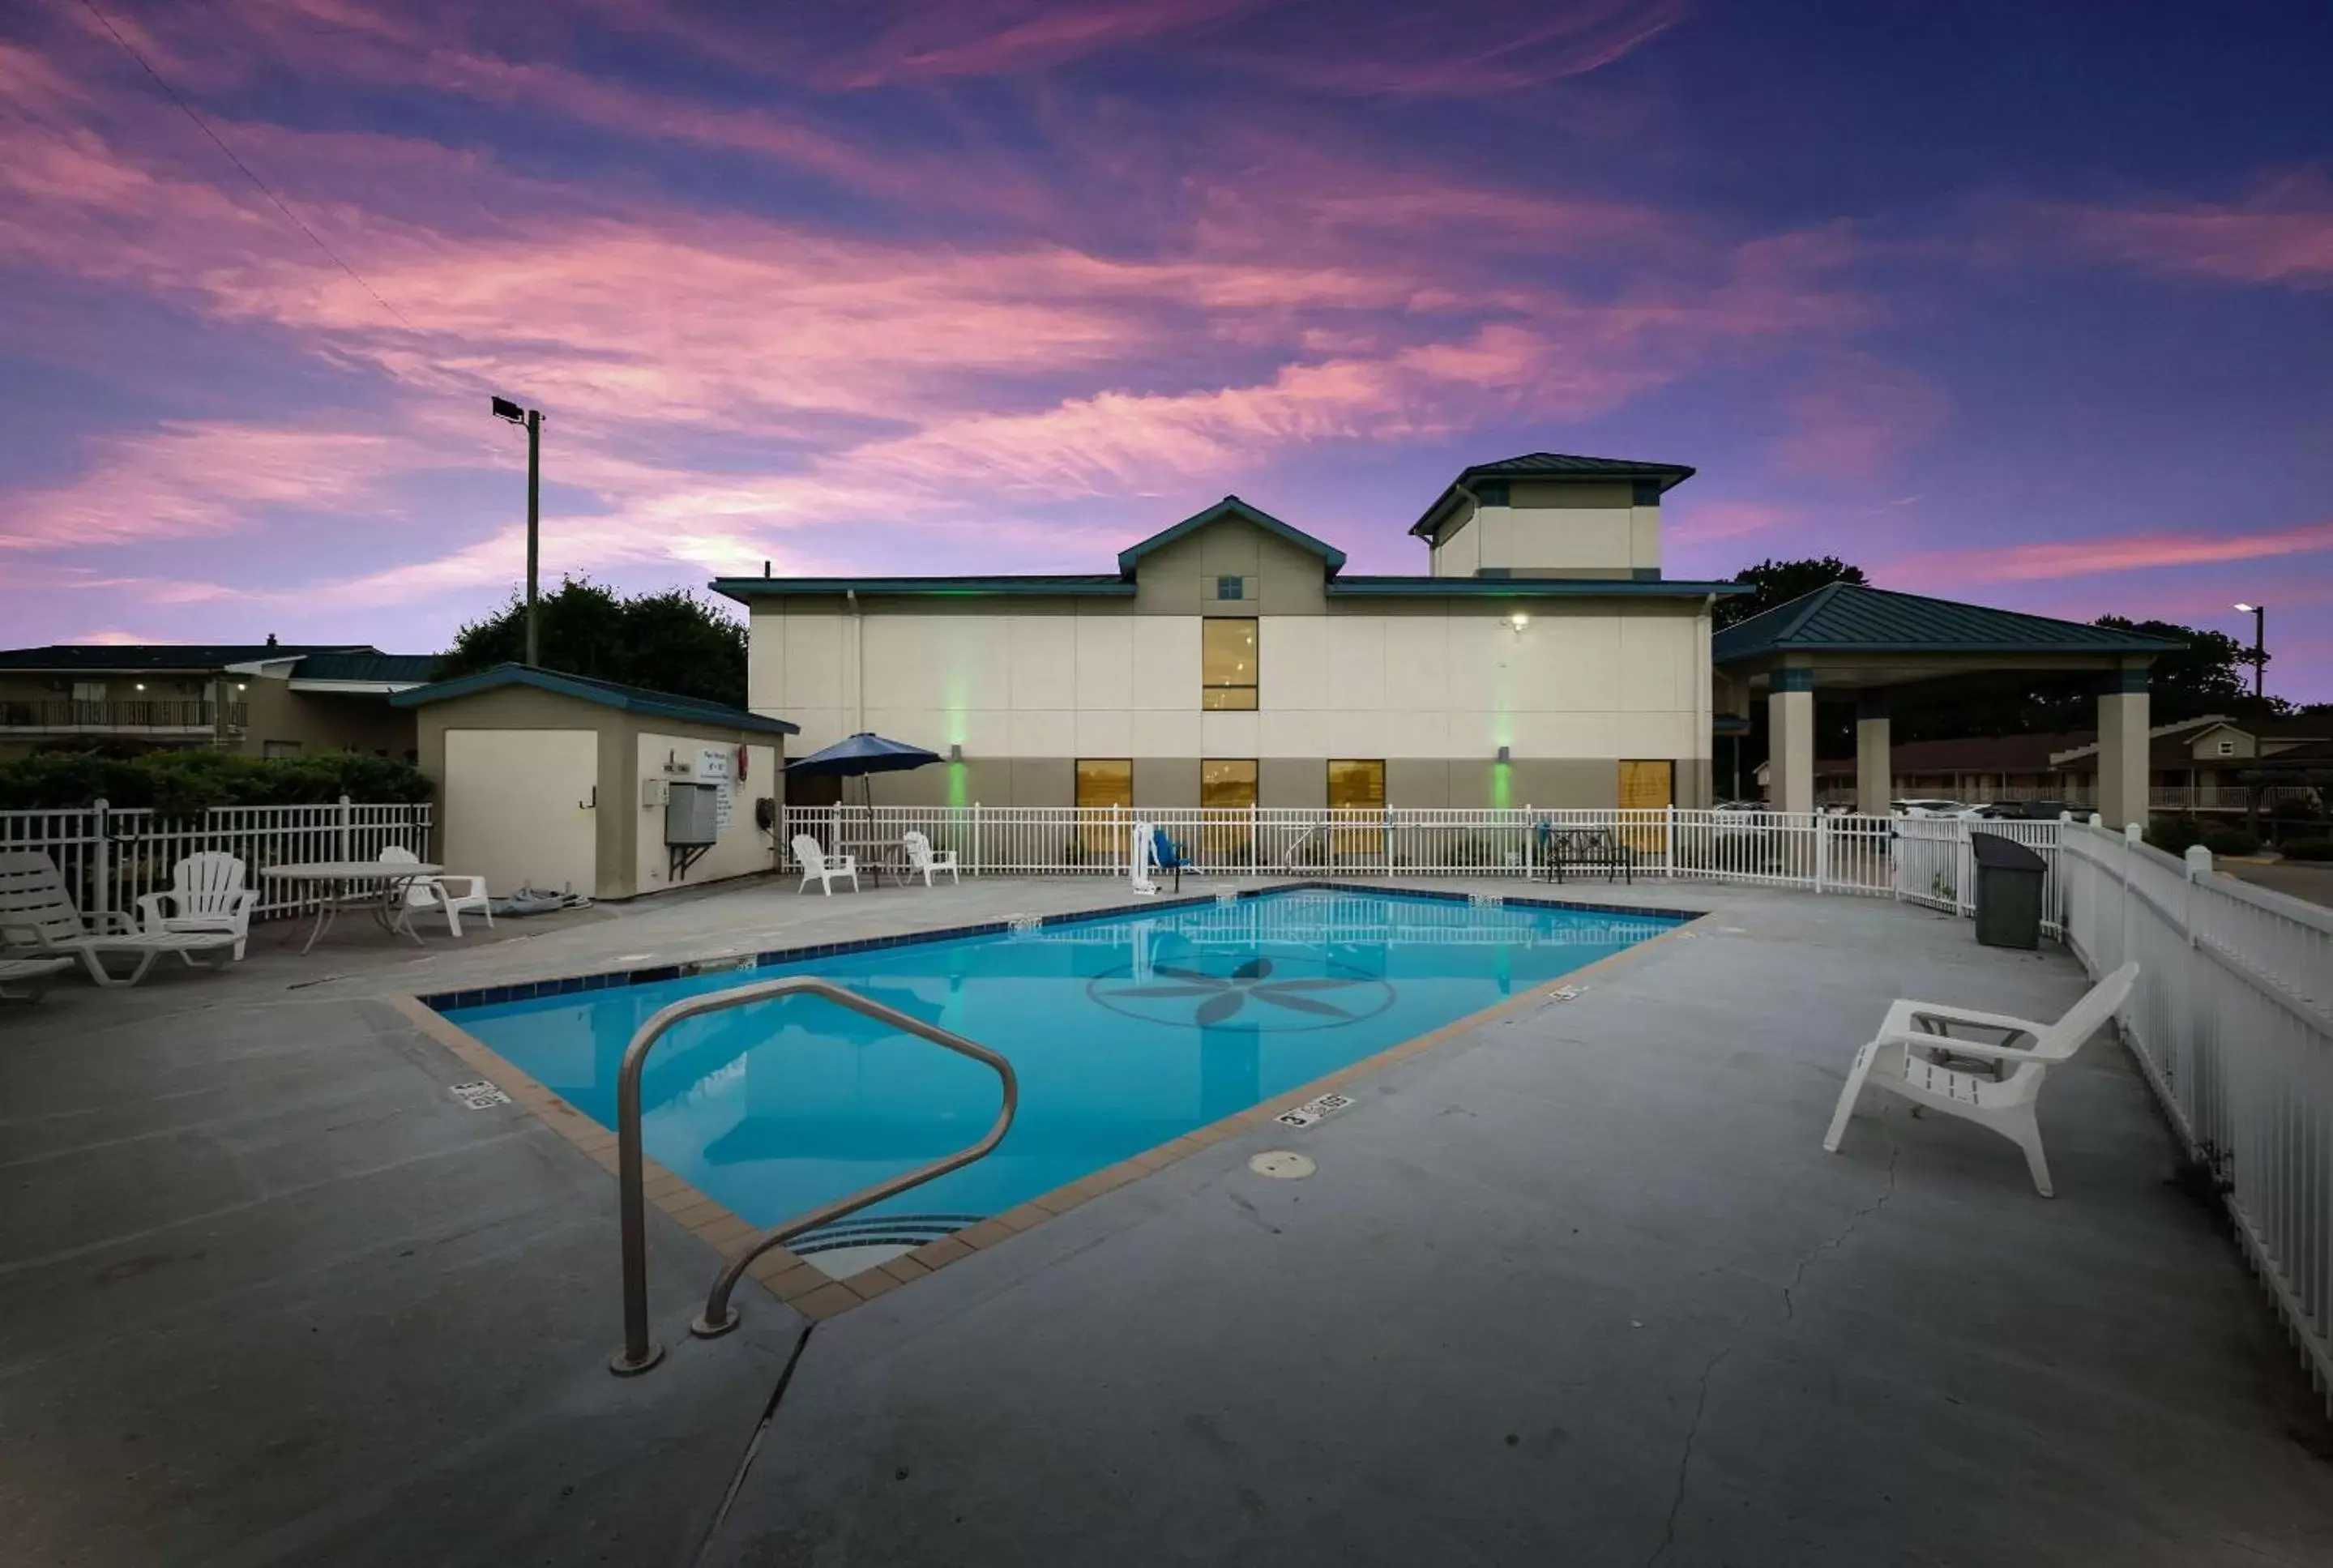 Activities, Swimming Pool in Quality Inn Jacksonville near Little Rock Air Force Base